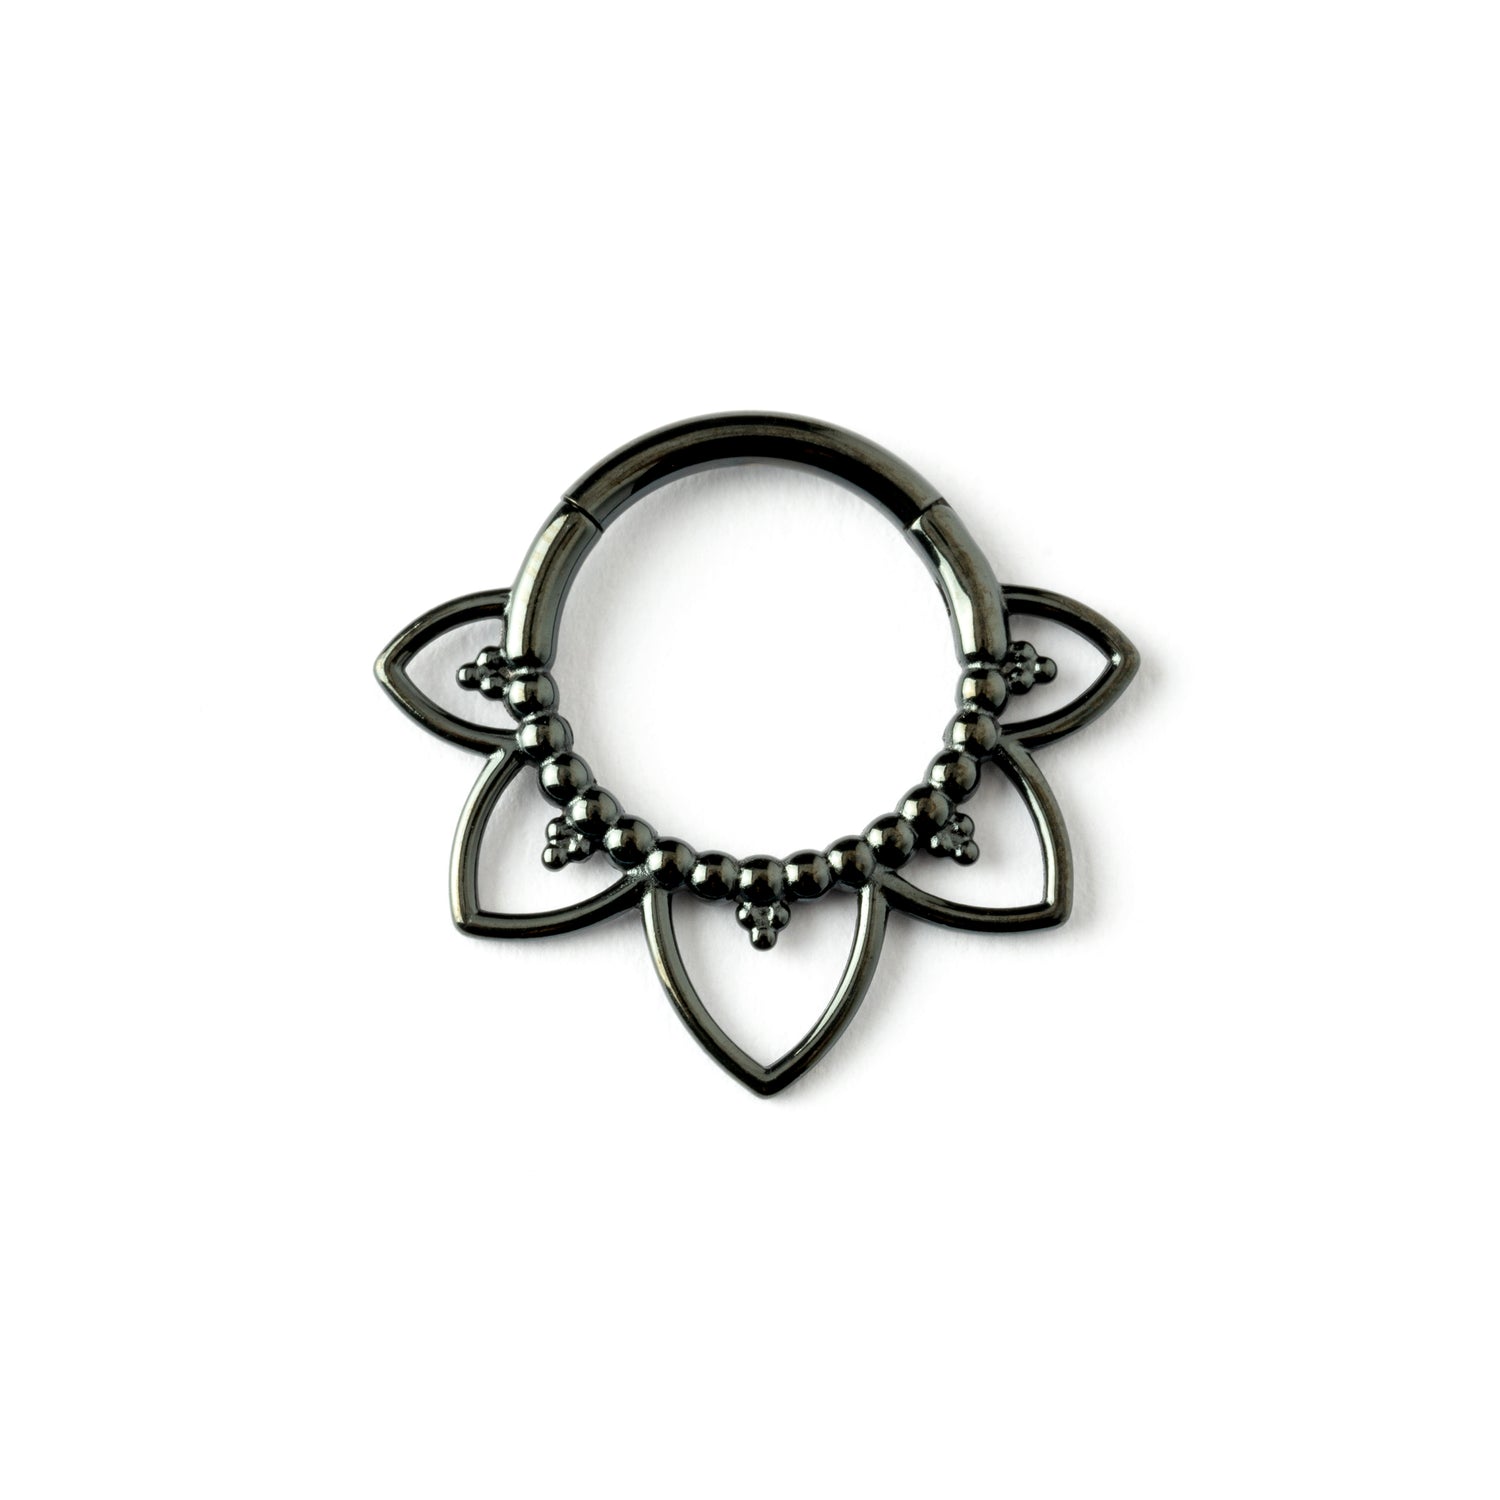 Iryia black surgical steel open lotus septum clickers frontal view